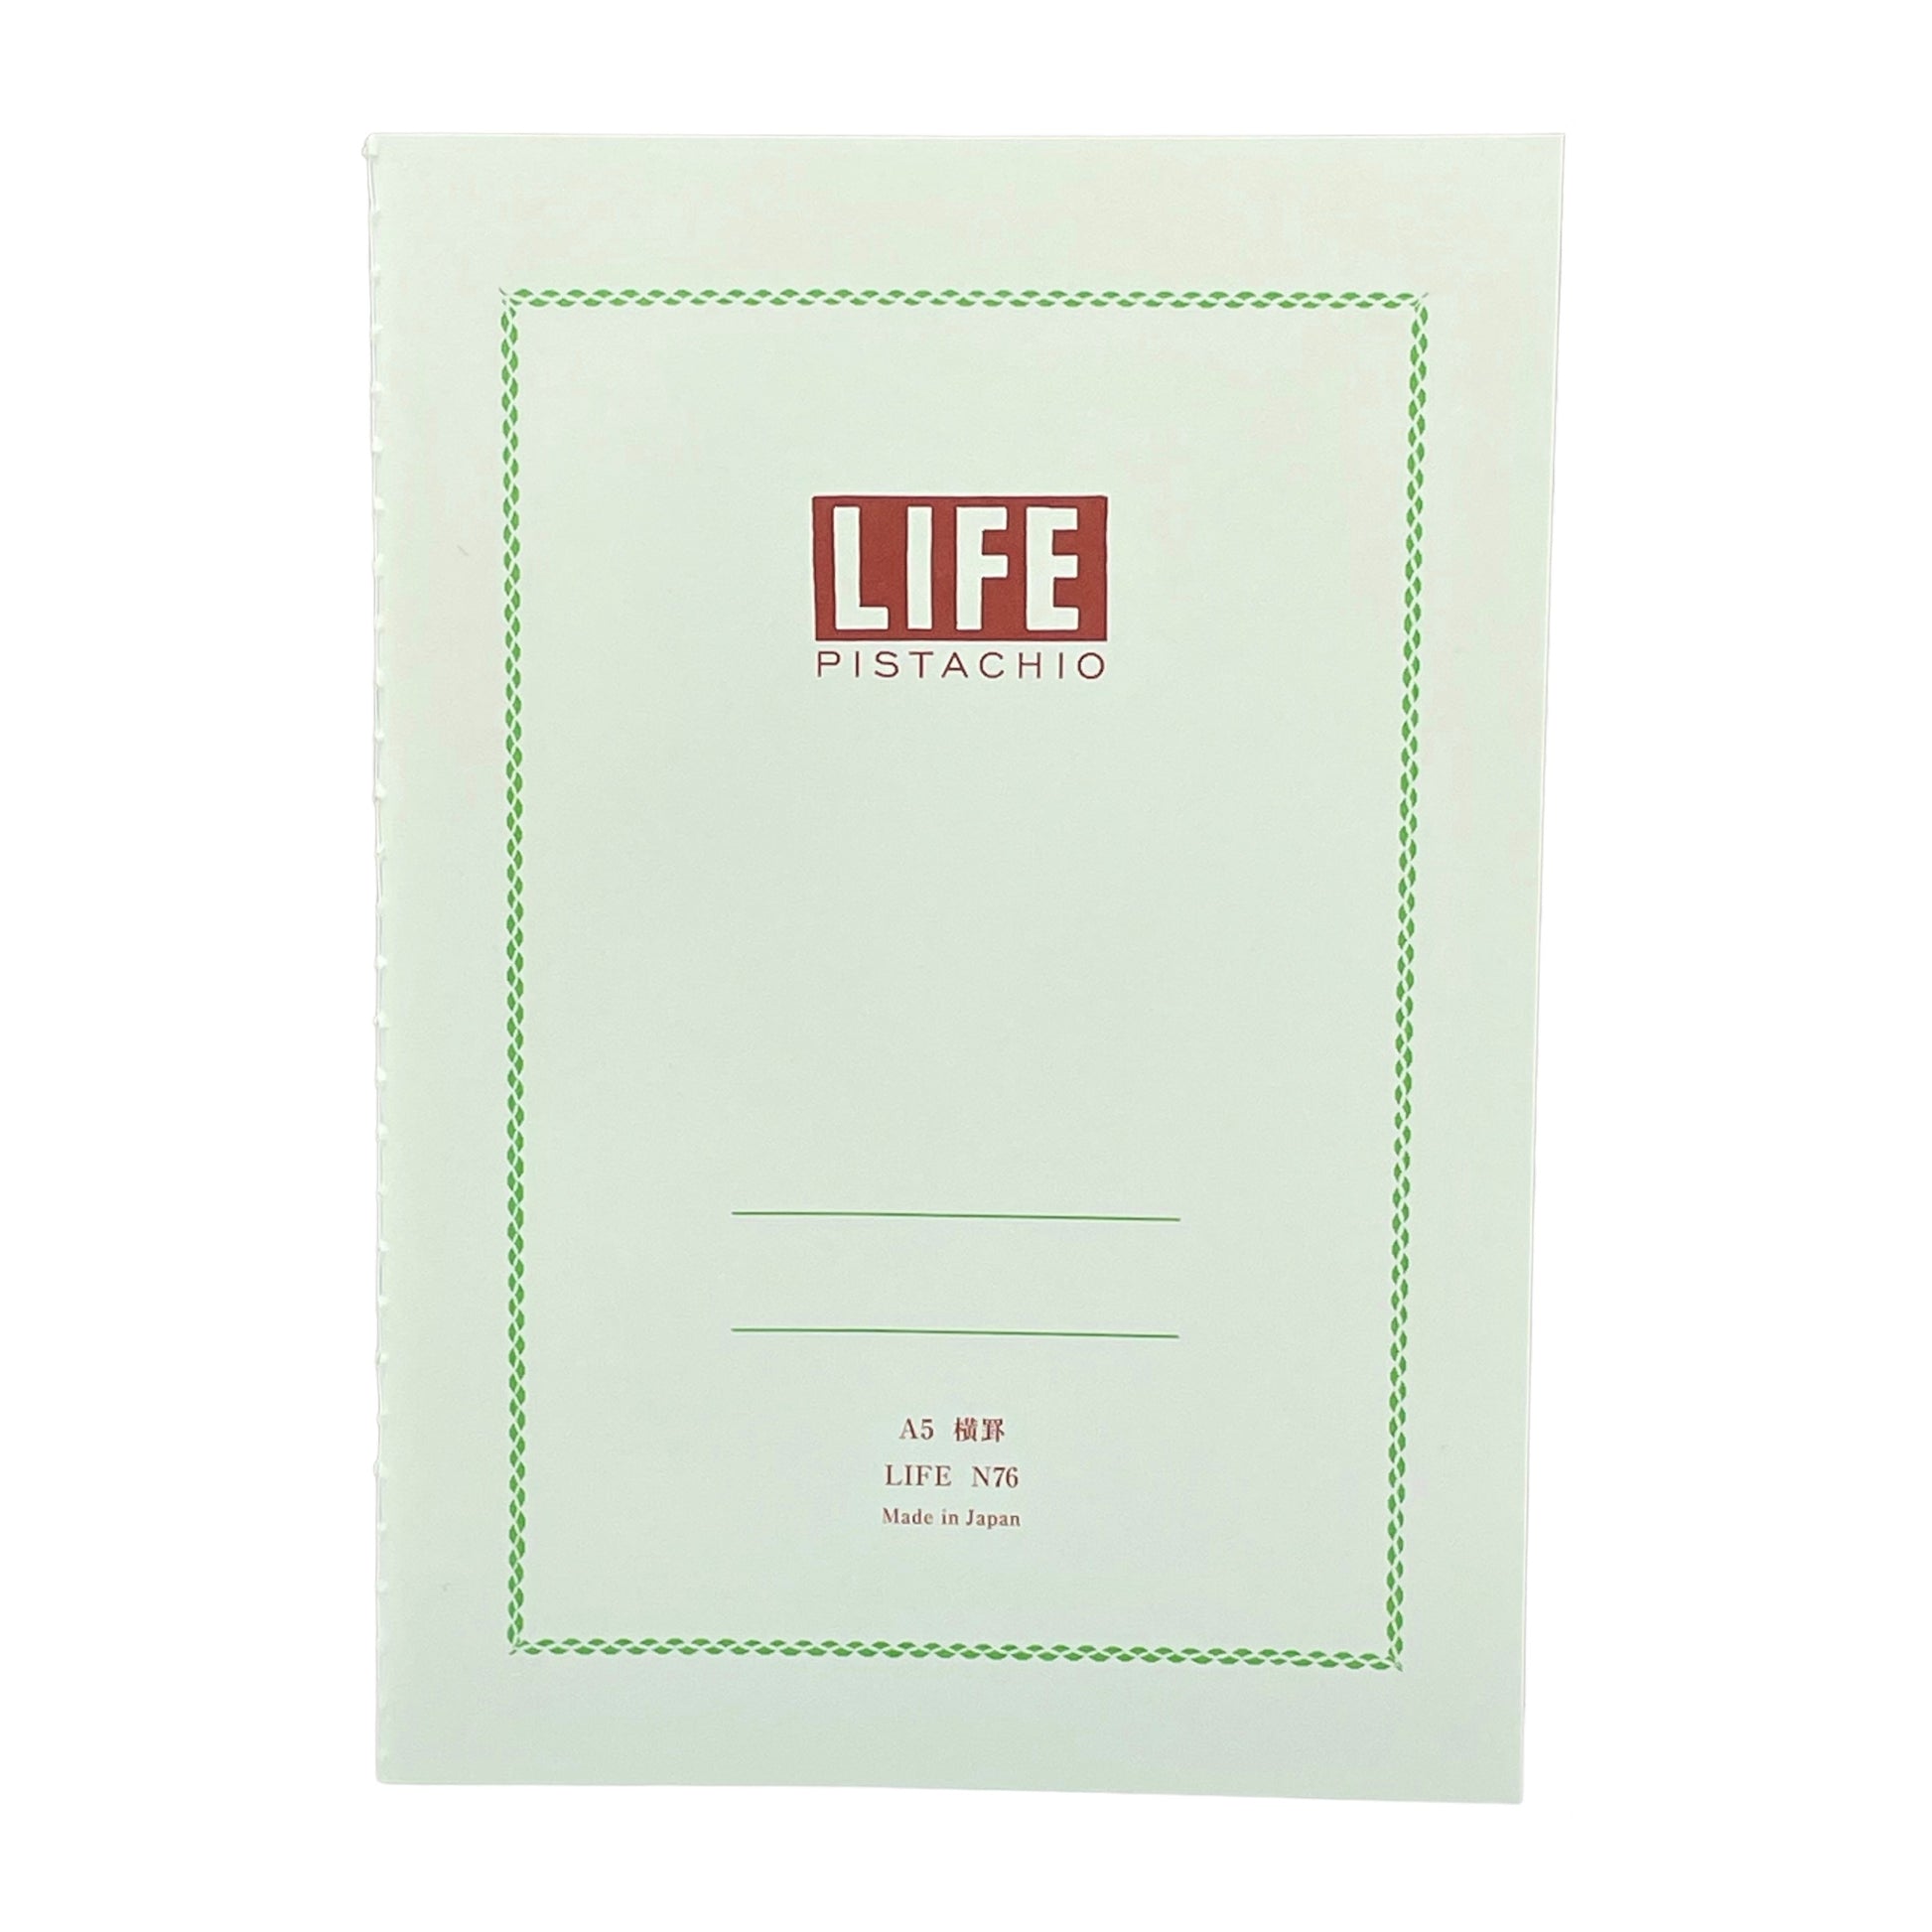 A5 softcover notebook with a soft green cover with green border and branding by Japanese brand Life Japan